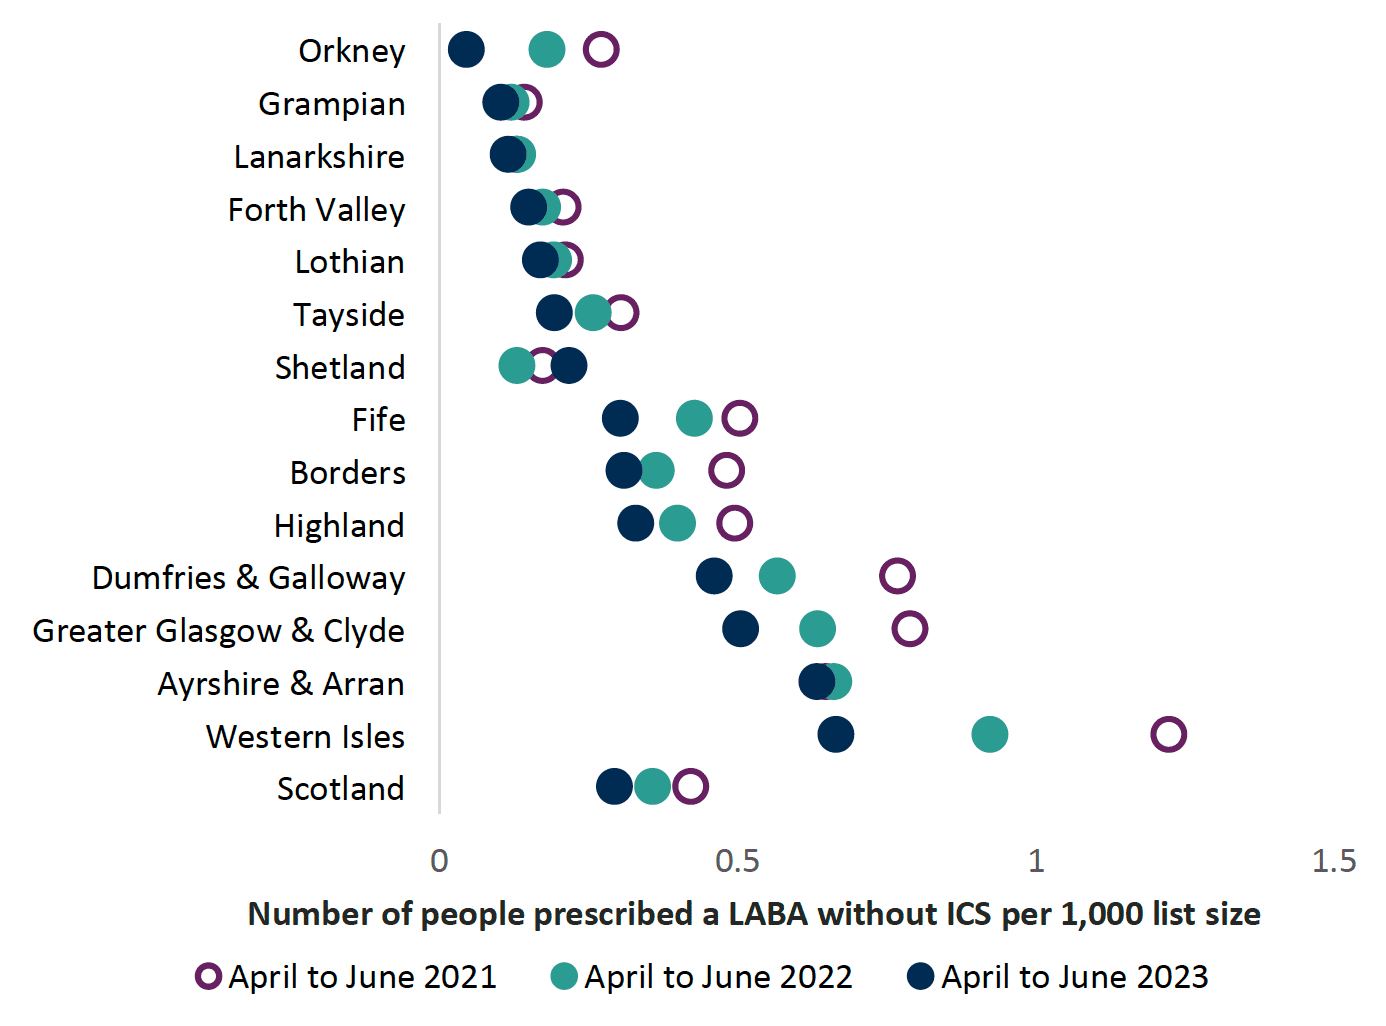 Chart showing people prescribed a LABA without ICS per 1000 patient size compared between health boards and Scotland from 2021 to 2023. Overall Scotland trend is decreasing